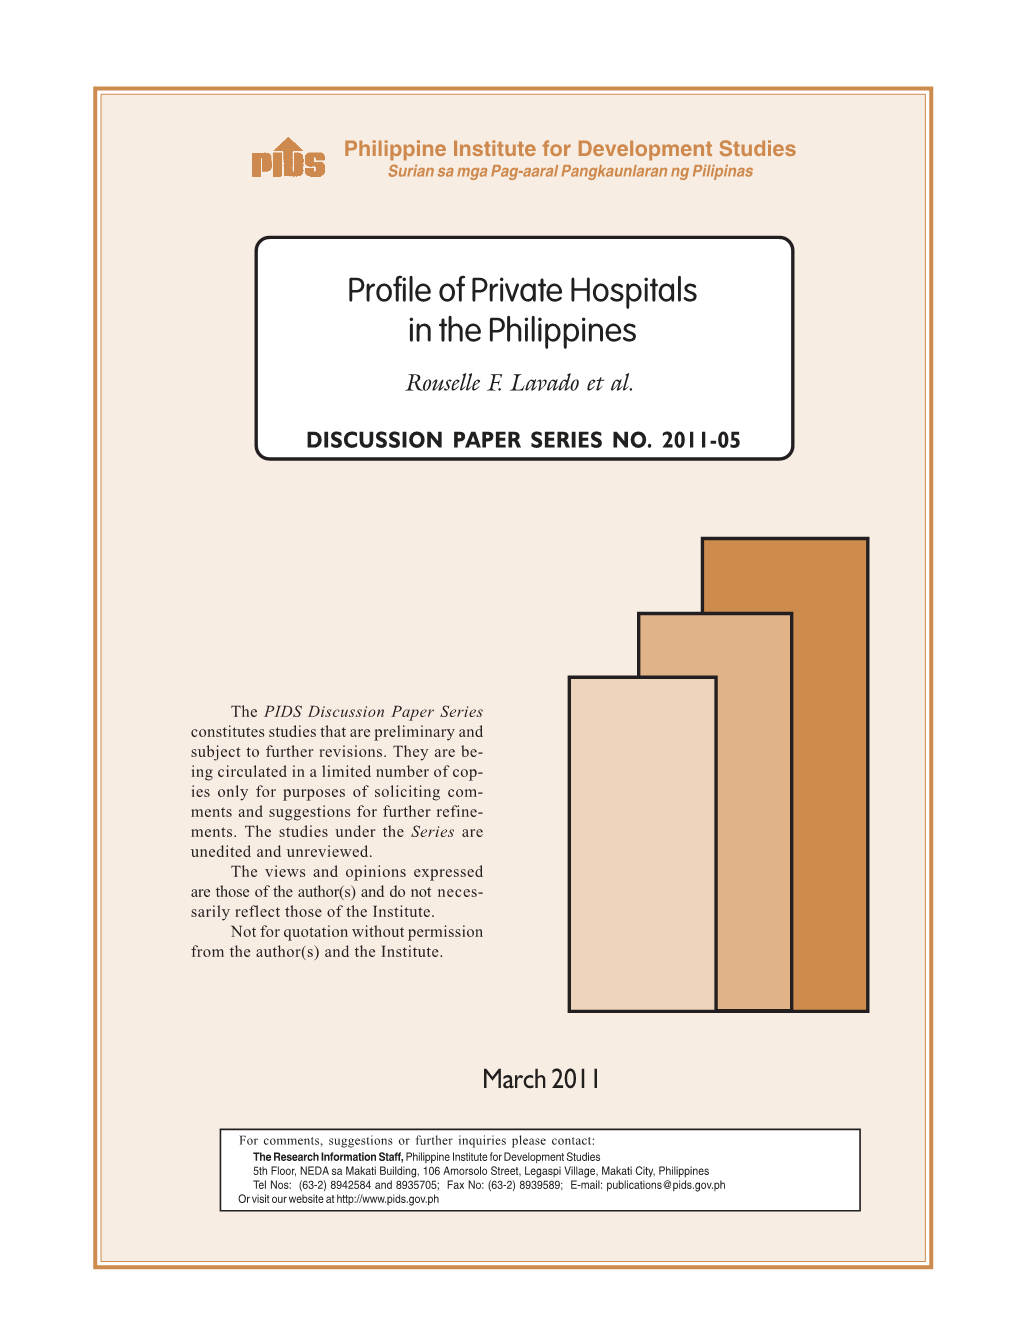 Profile of Private Hospitals in the Philippines